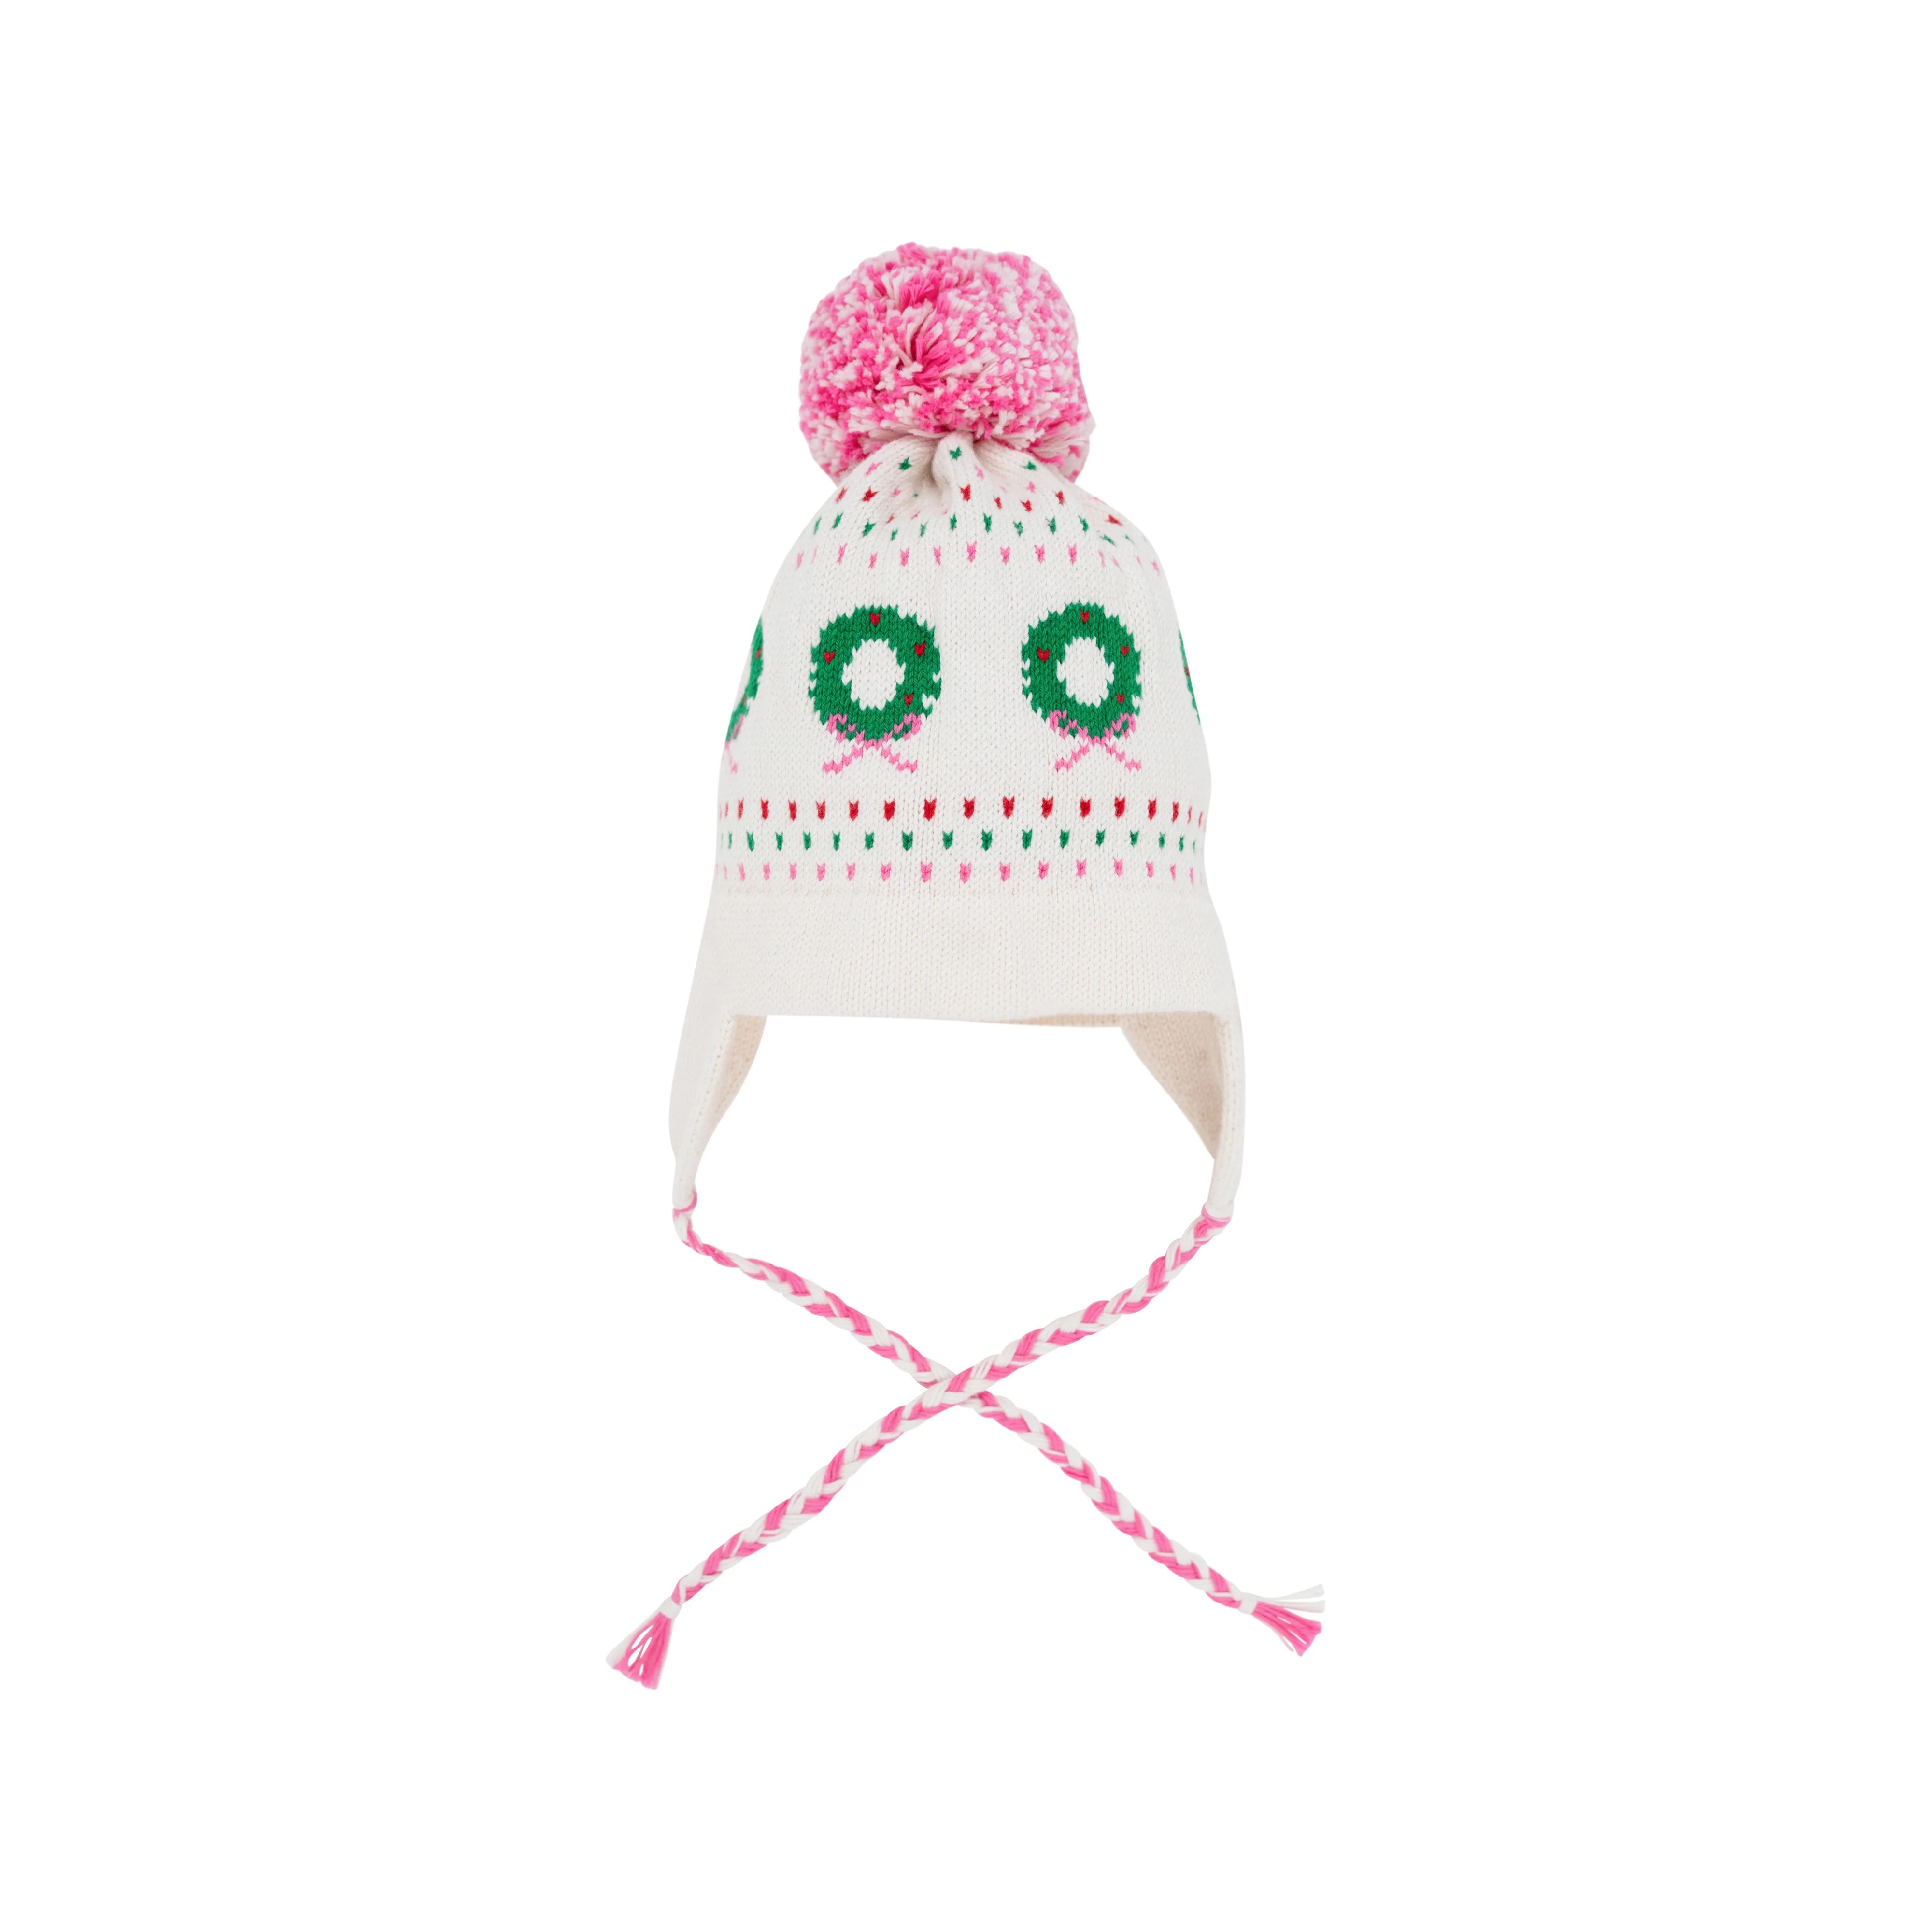 Parrish Pom Pom Hat - Palmetto Pearl with Hamptons Hot Pink & Wreaths | The Beaufort Bonnet Company